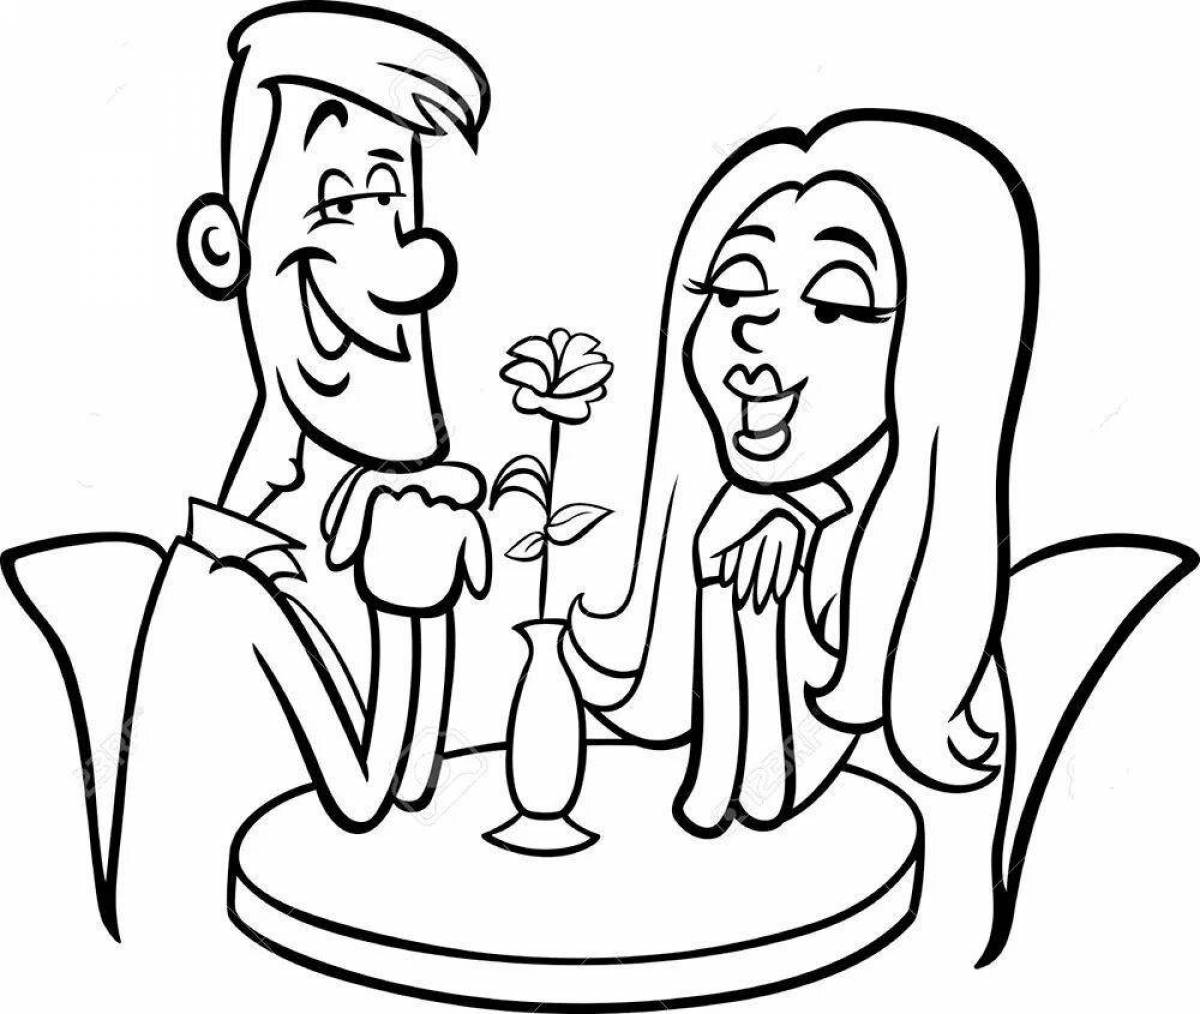 Coloring page compassionate wife and husband